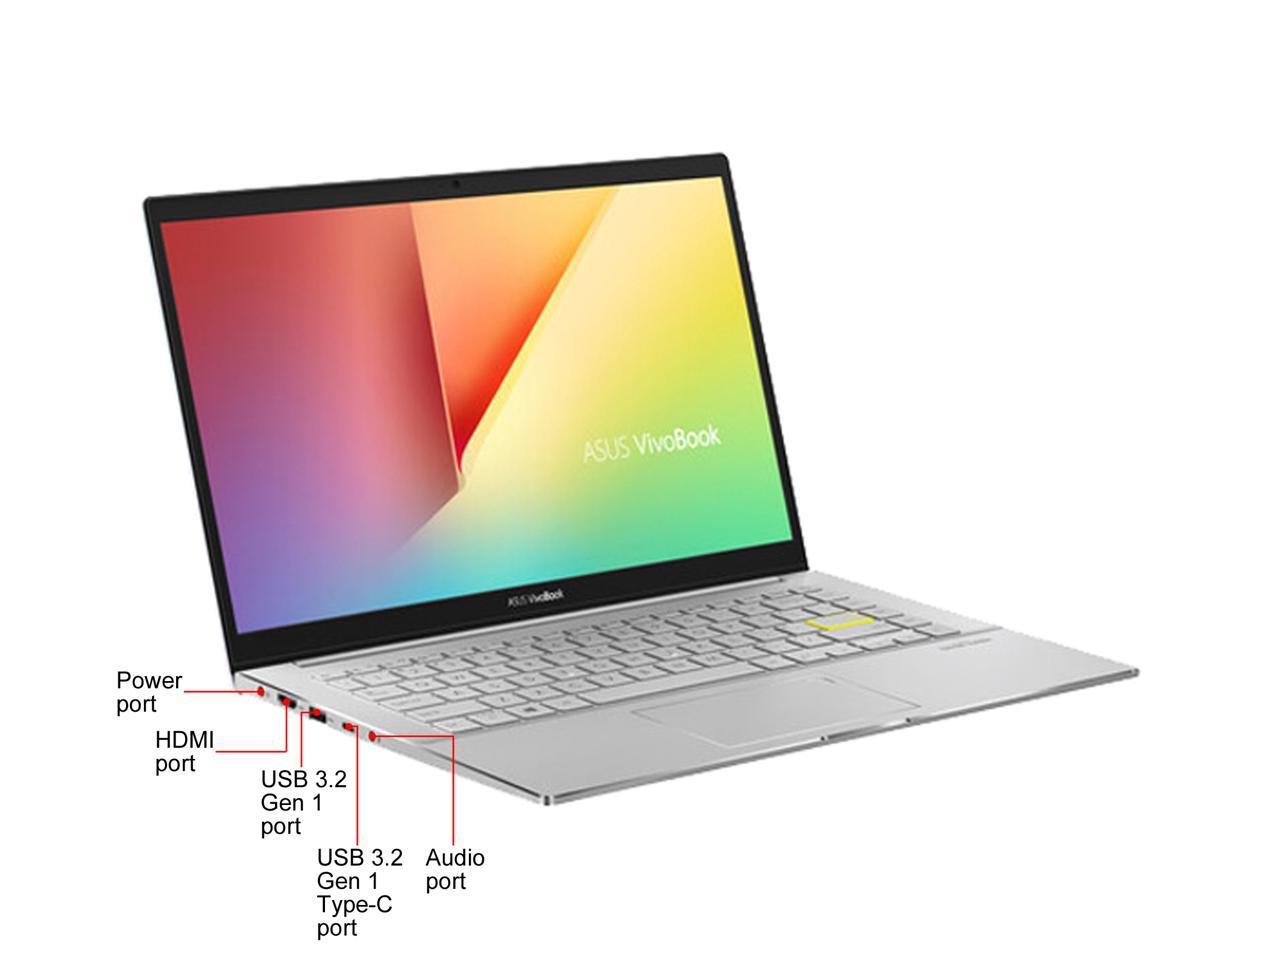 ASUS VivoBook S14 S433 Thin and Light Laptop, 14" FHD Display, Intel Core i5-1135G7 CPU, 8 GB DDR4 RAM, 512 GB PCIe SSD, Thunderbolt 3, Wi-Fi 6, Windows 10 Home, Dreamy White, S433EA-DH51-WH